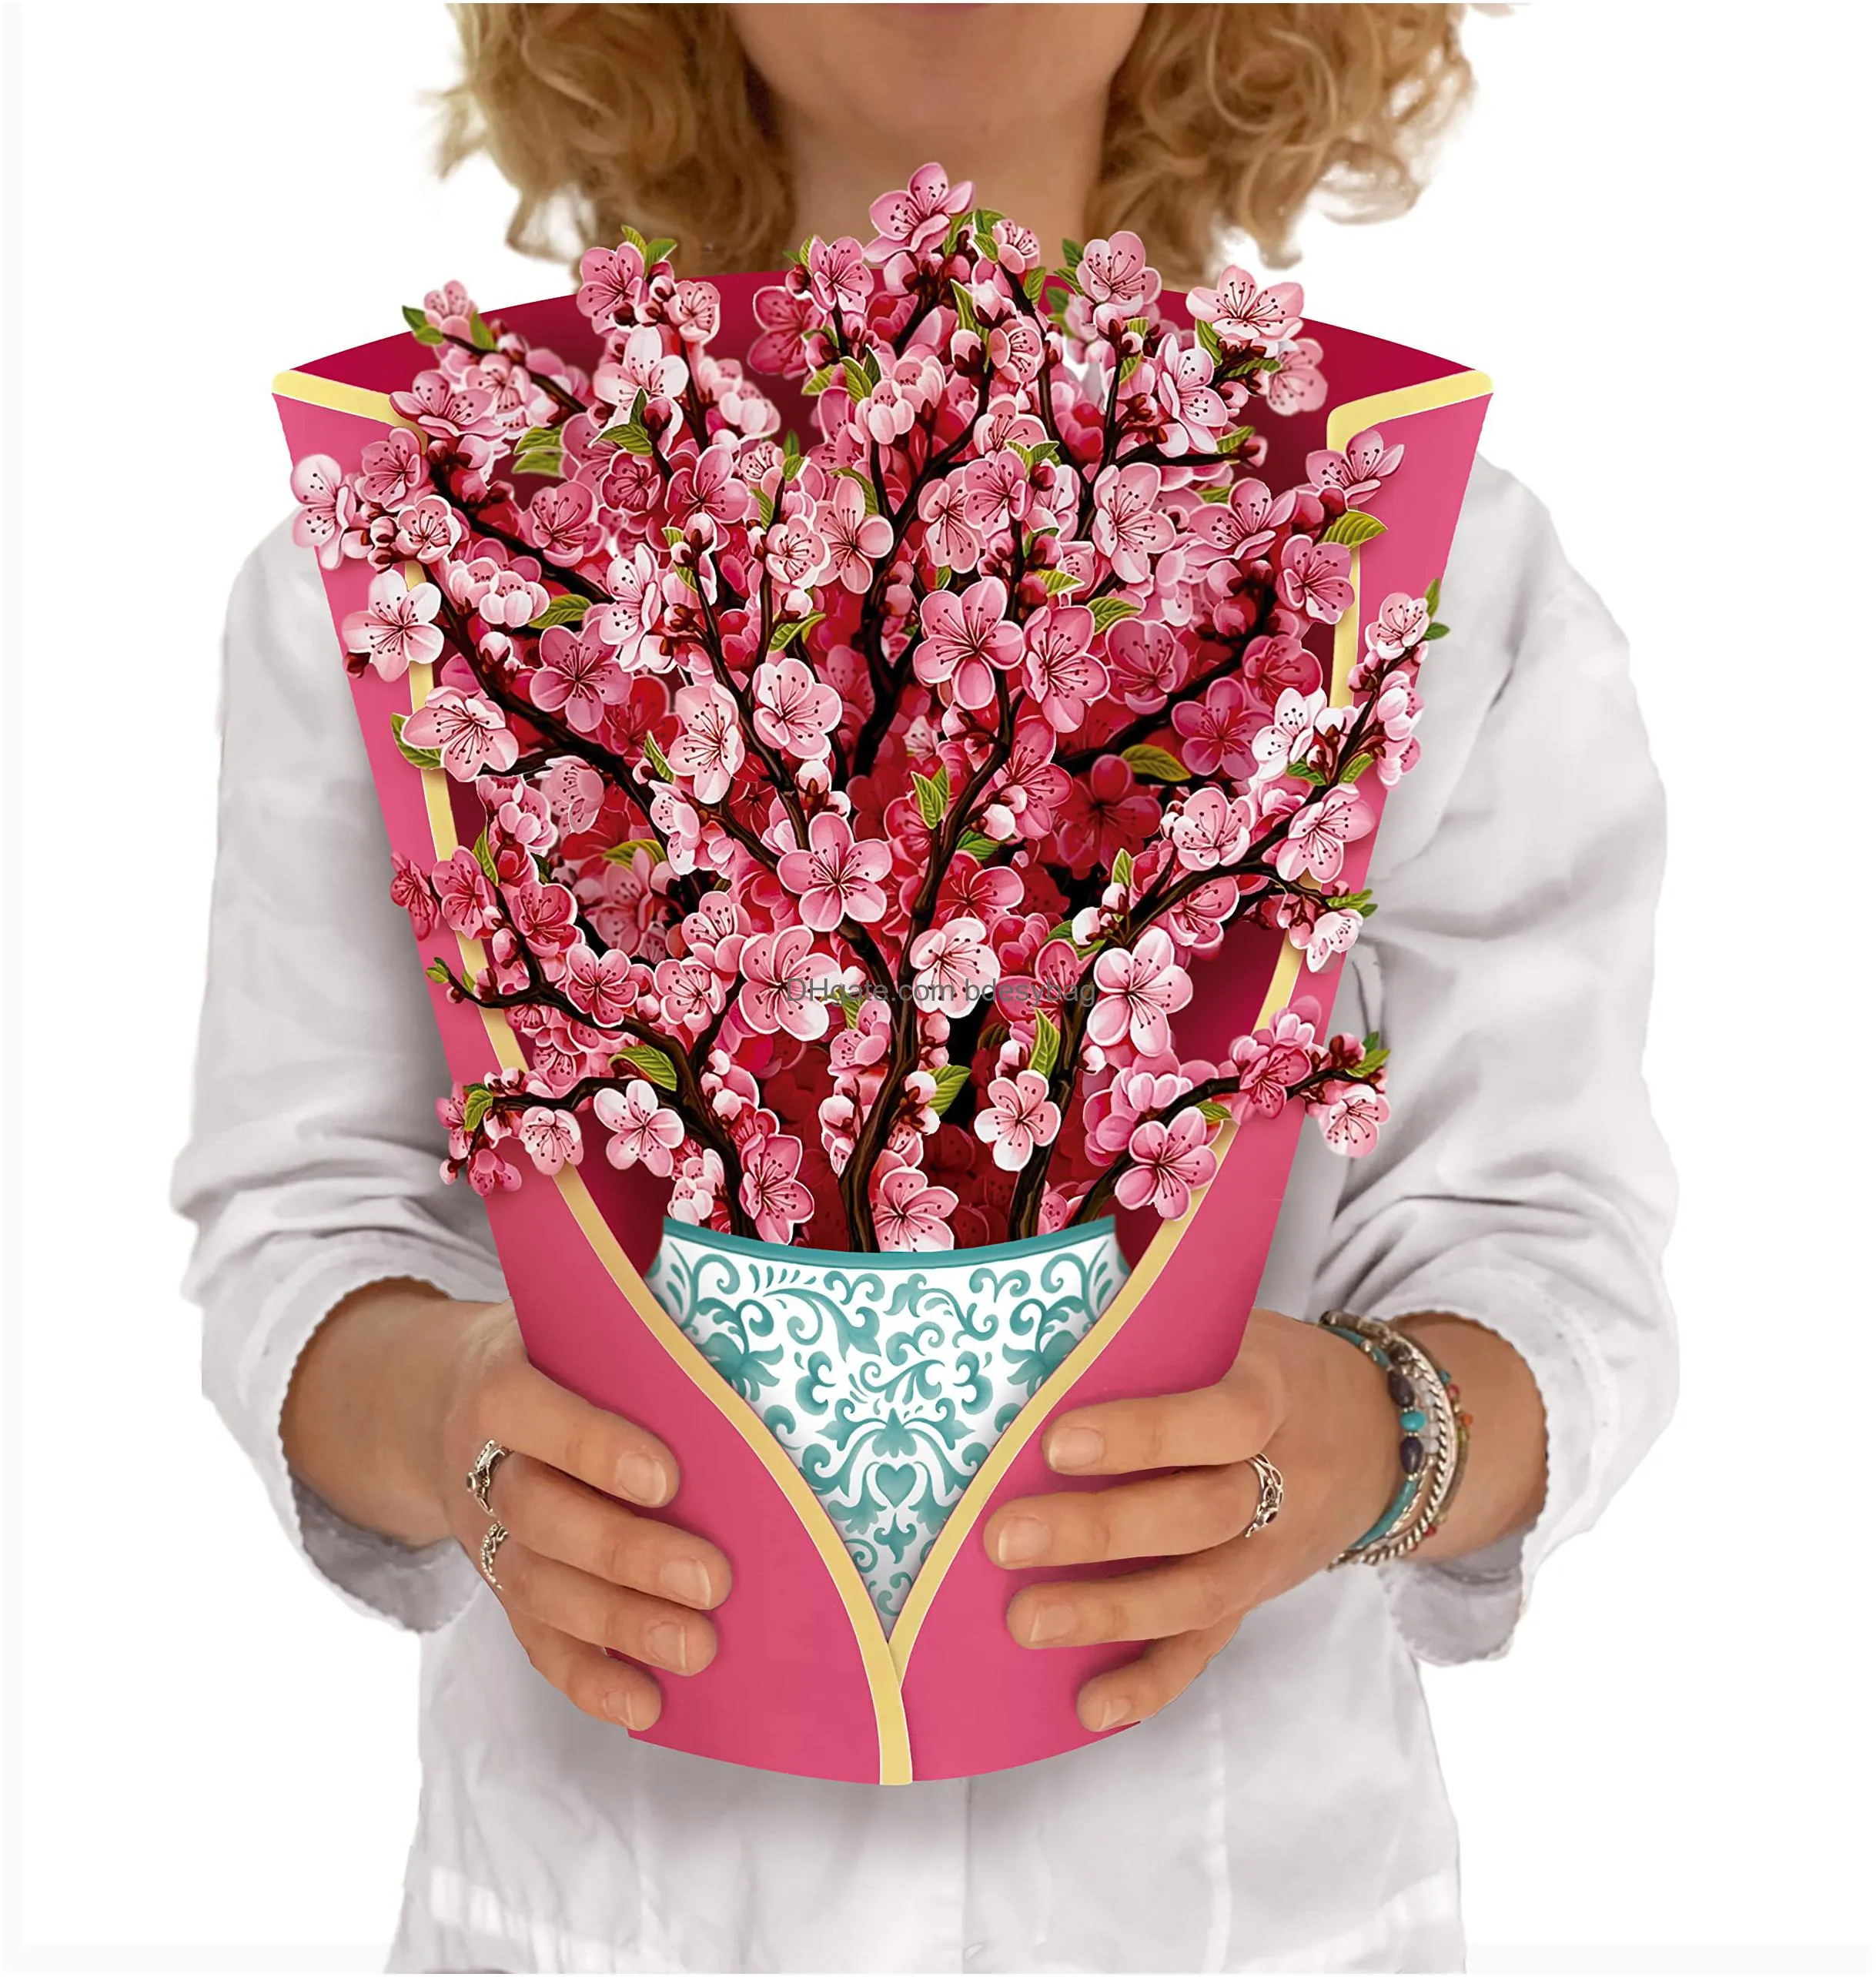  cut paper  up cards 12 inch life sized forever flower bouquet 3d popup greeting cards with note card and envelope